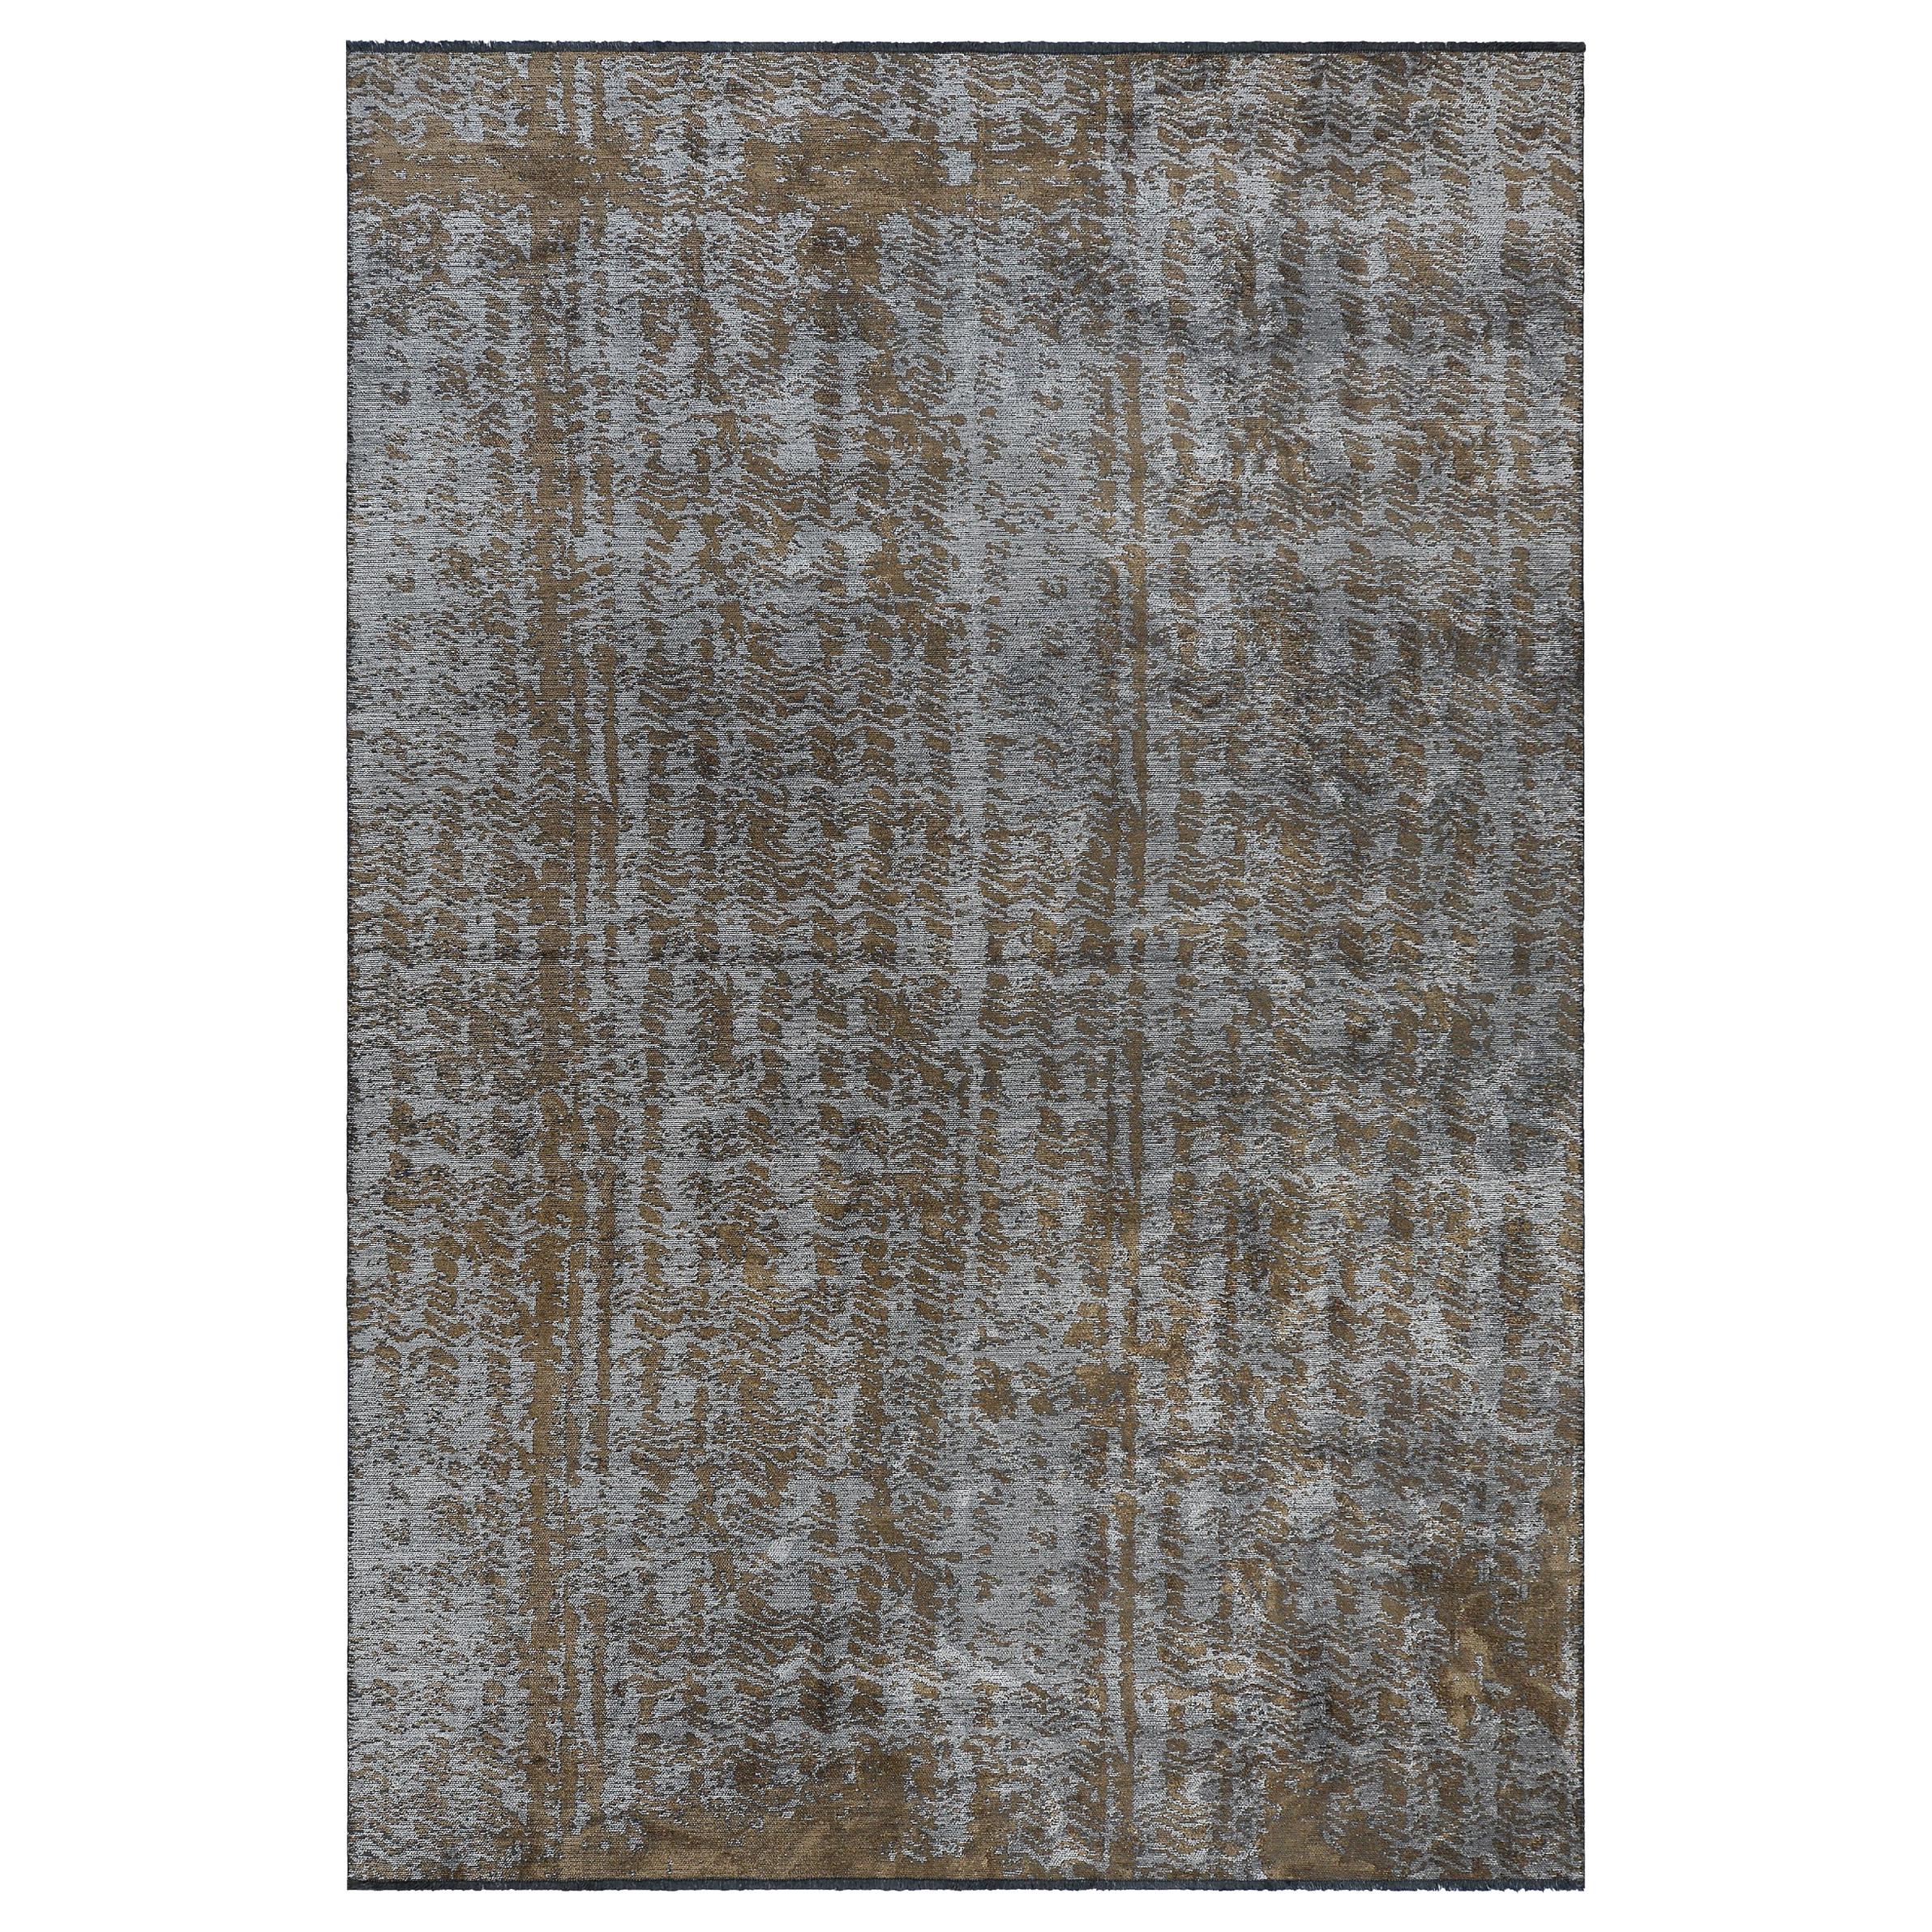 Modernist Mink Brown and Silver Gray Abstract Design Rug with Shine